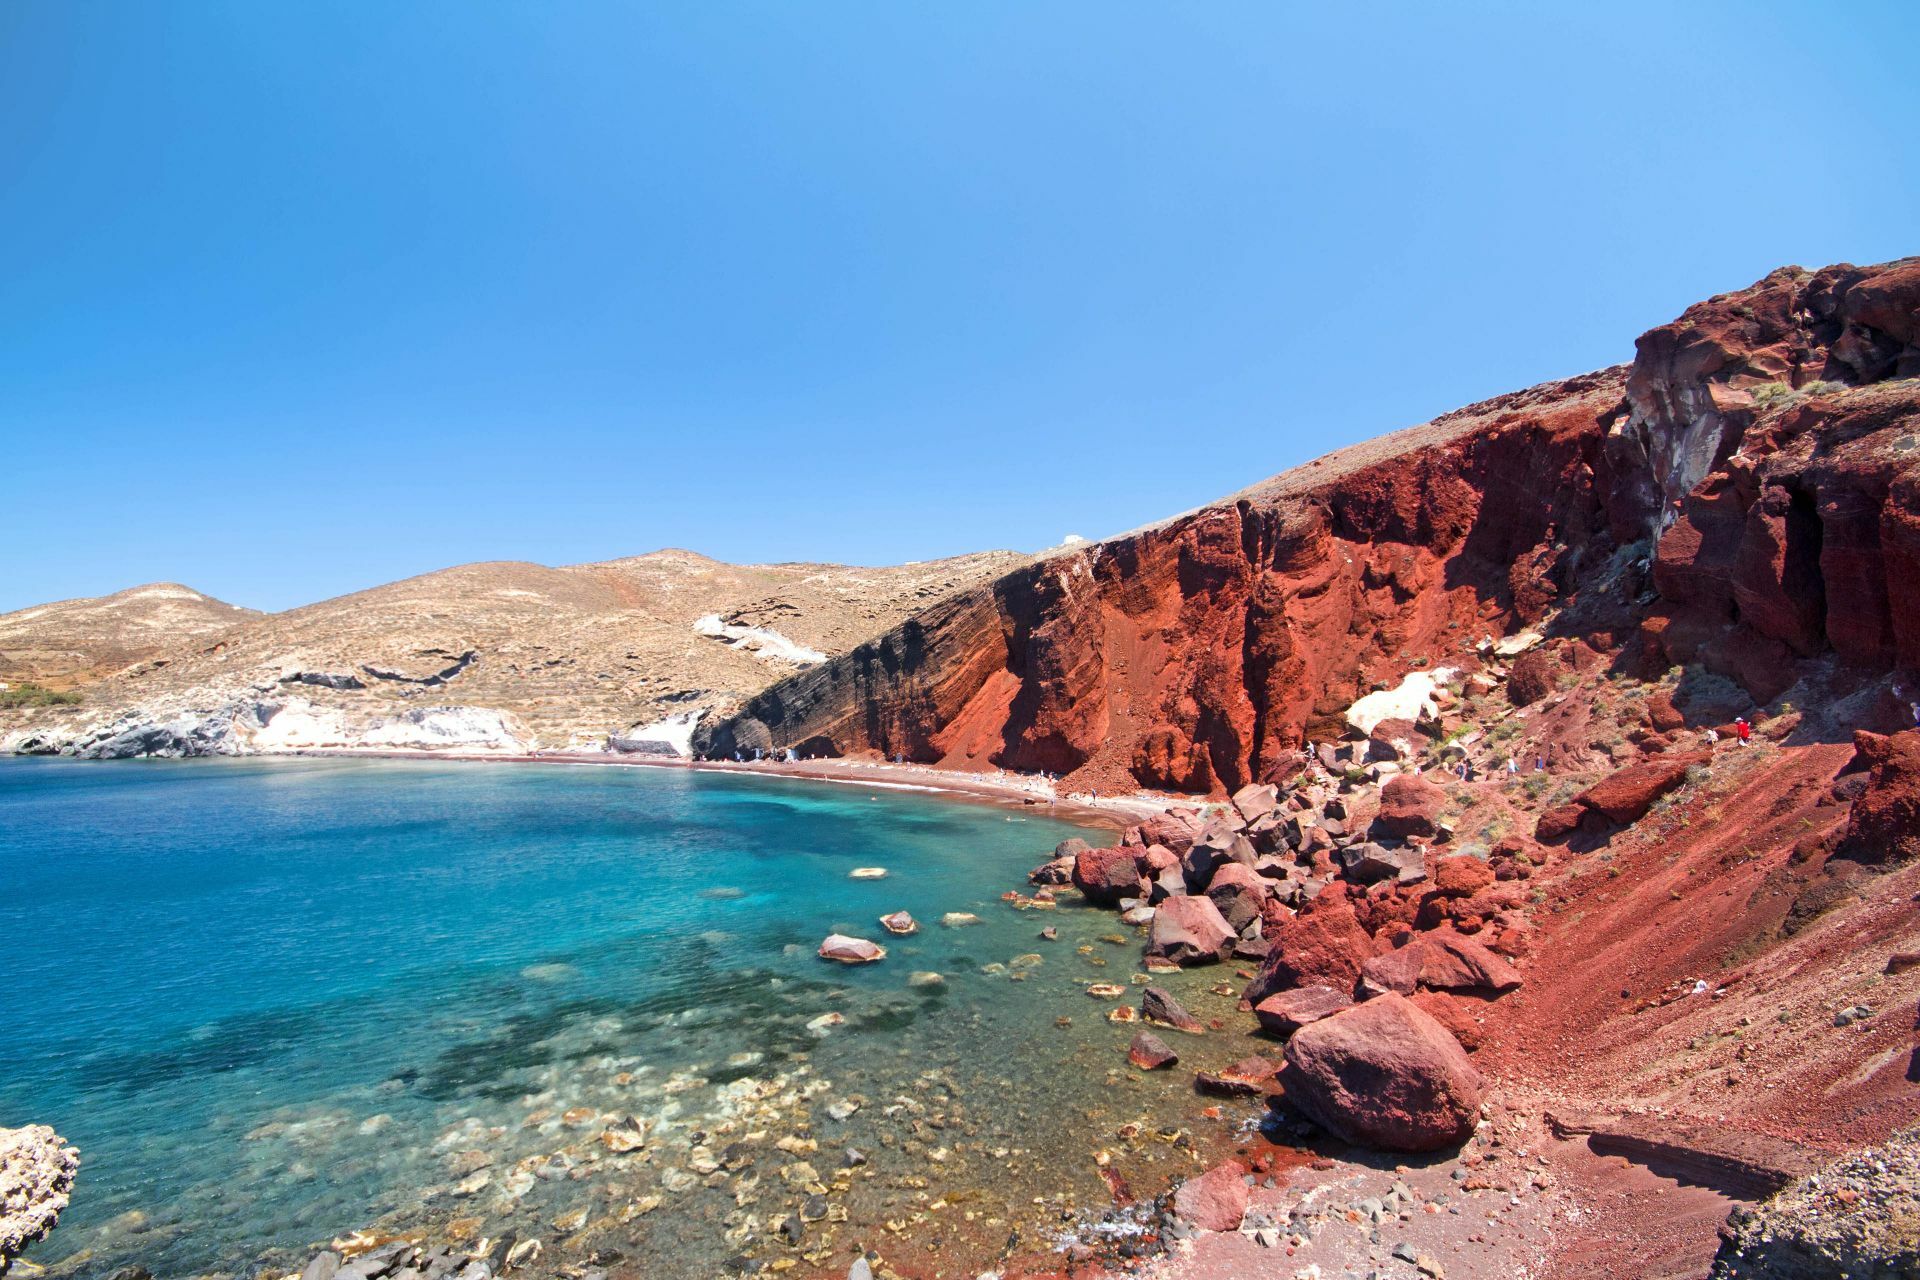 The Red Beach, one of the most impressive on Santorini island